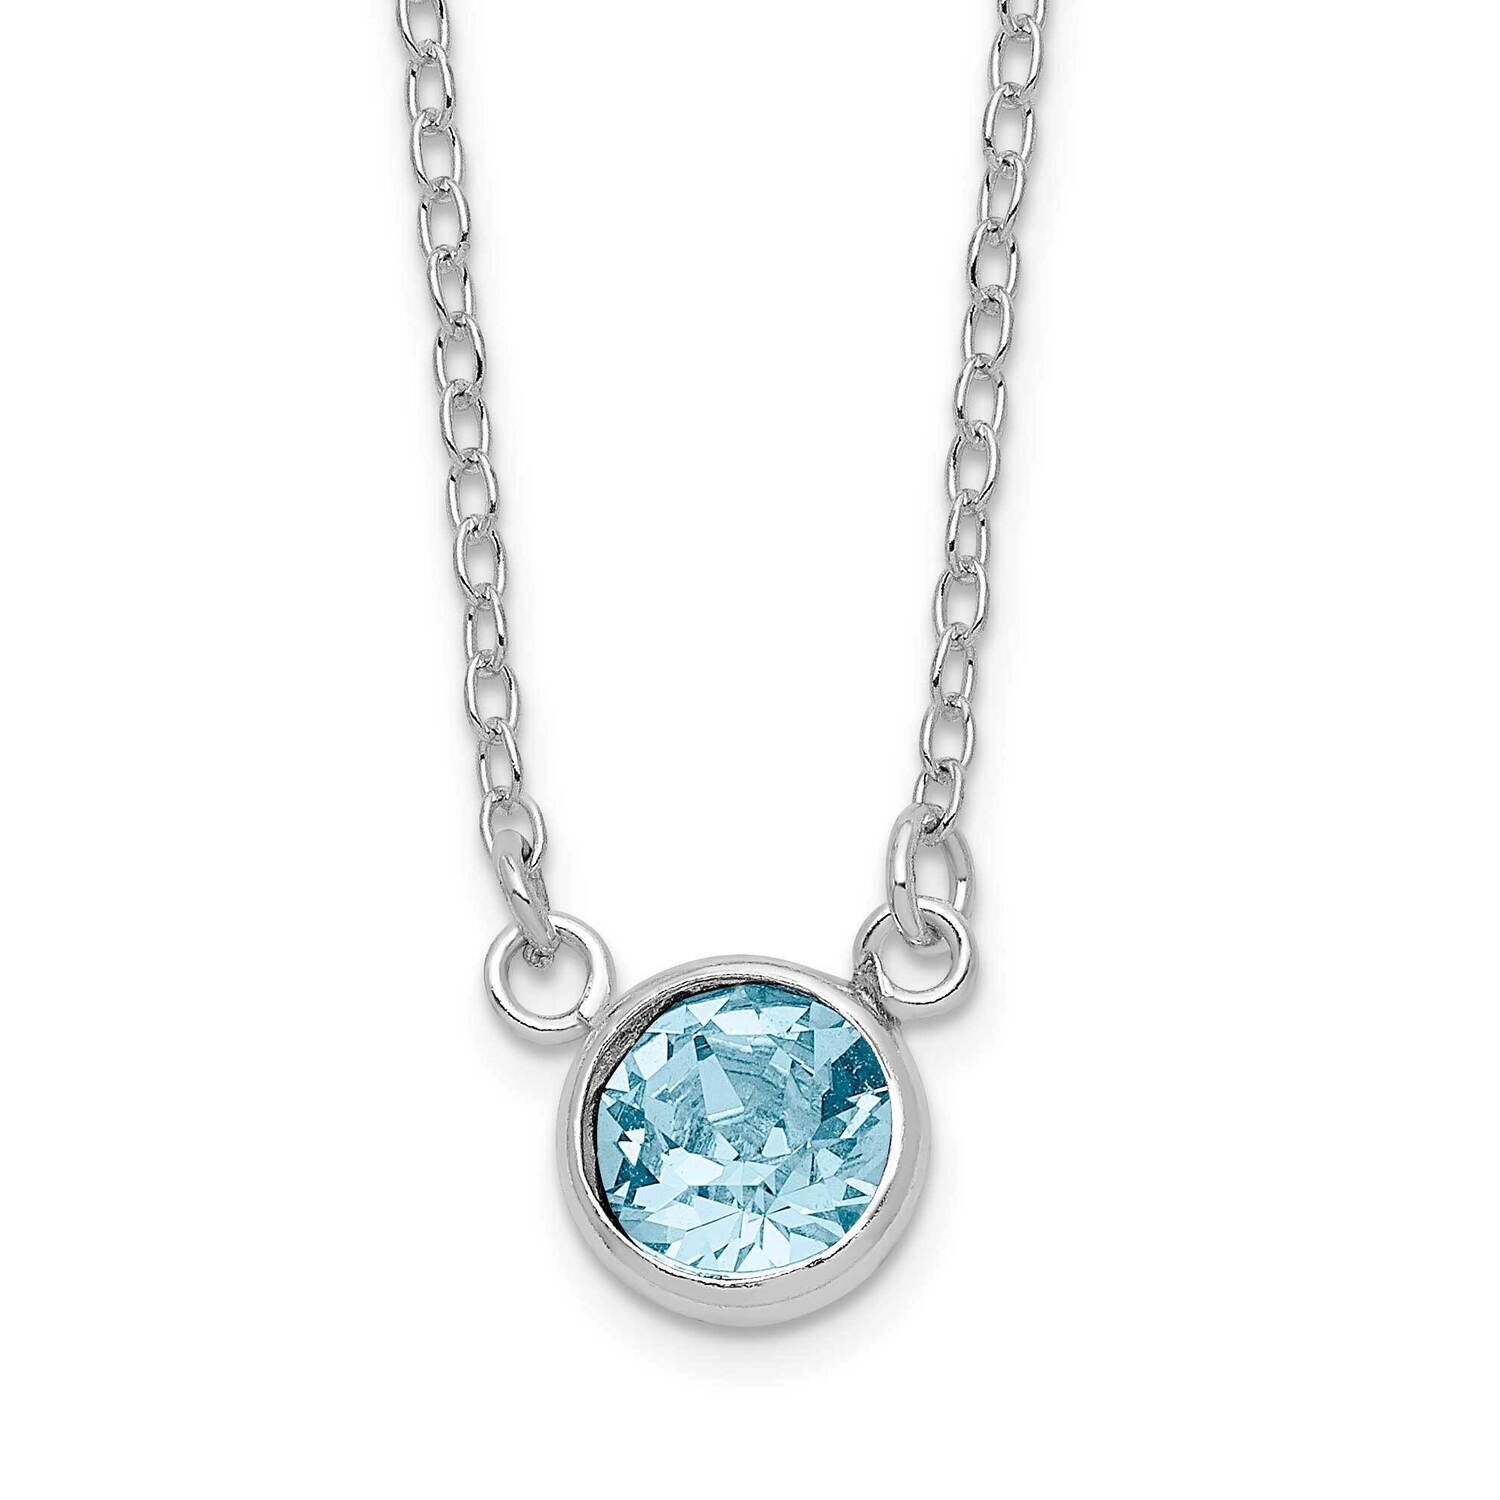 Blue Crystal Bezel 18.5 Inch Necklace Sterling Silver Rhodium-Plated QG6130-18.5